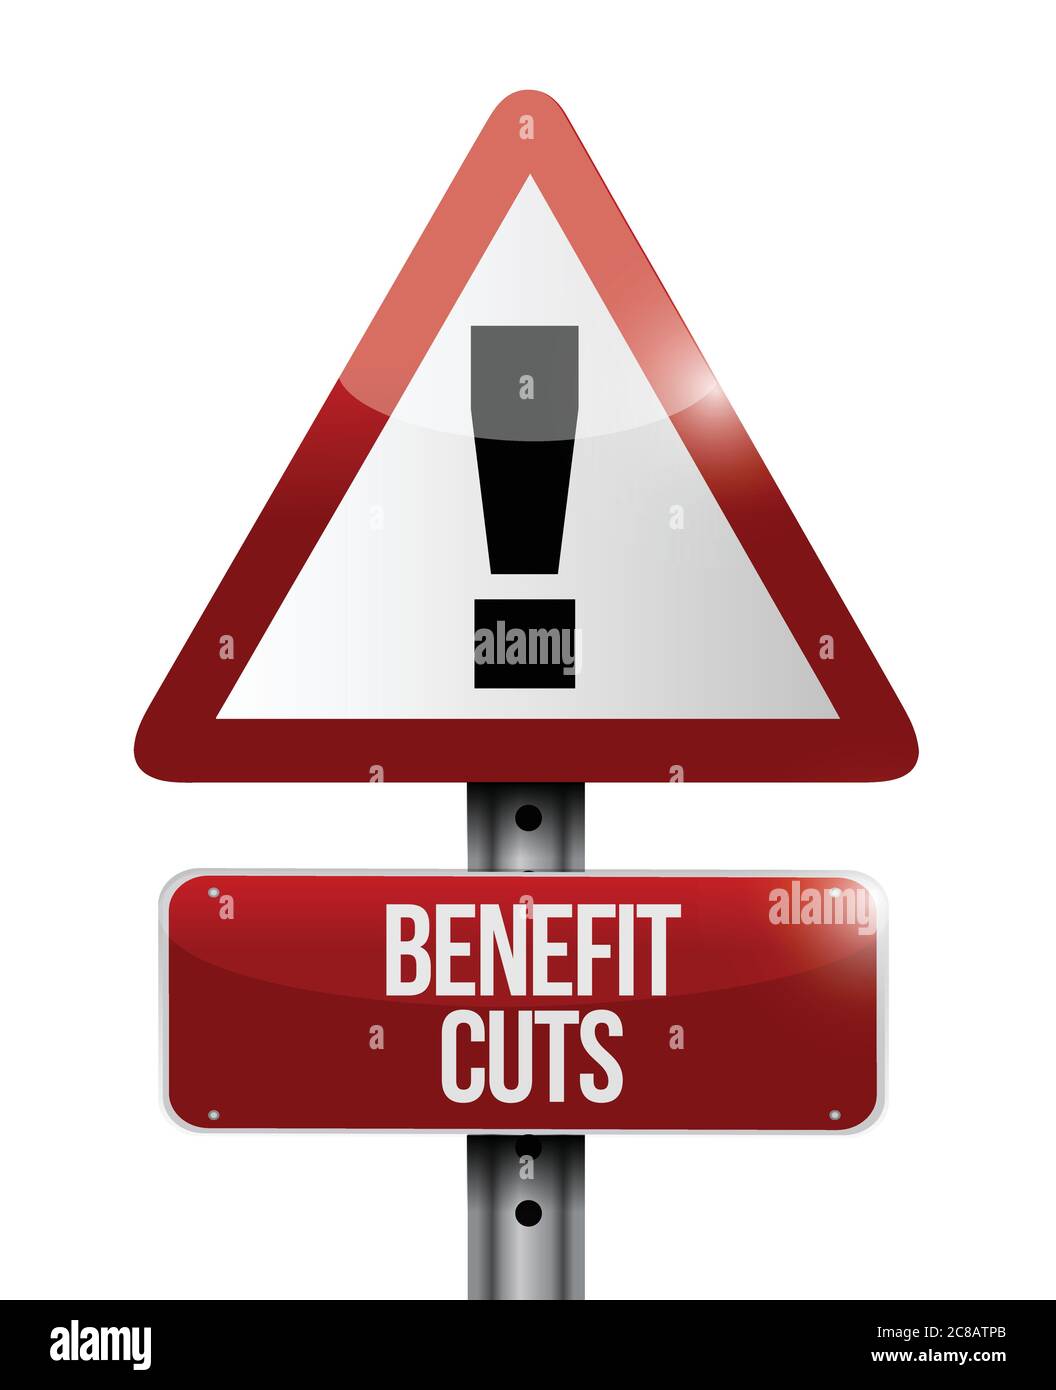 Benefit cuts warning road sign illustration design over a white background Stock Vector